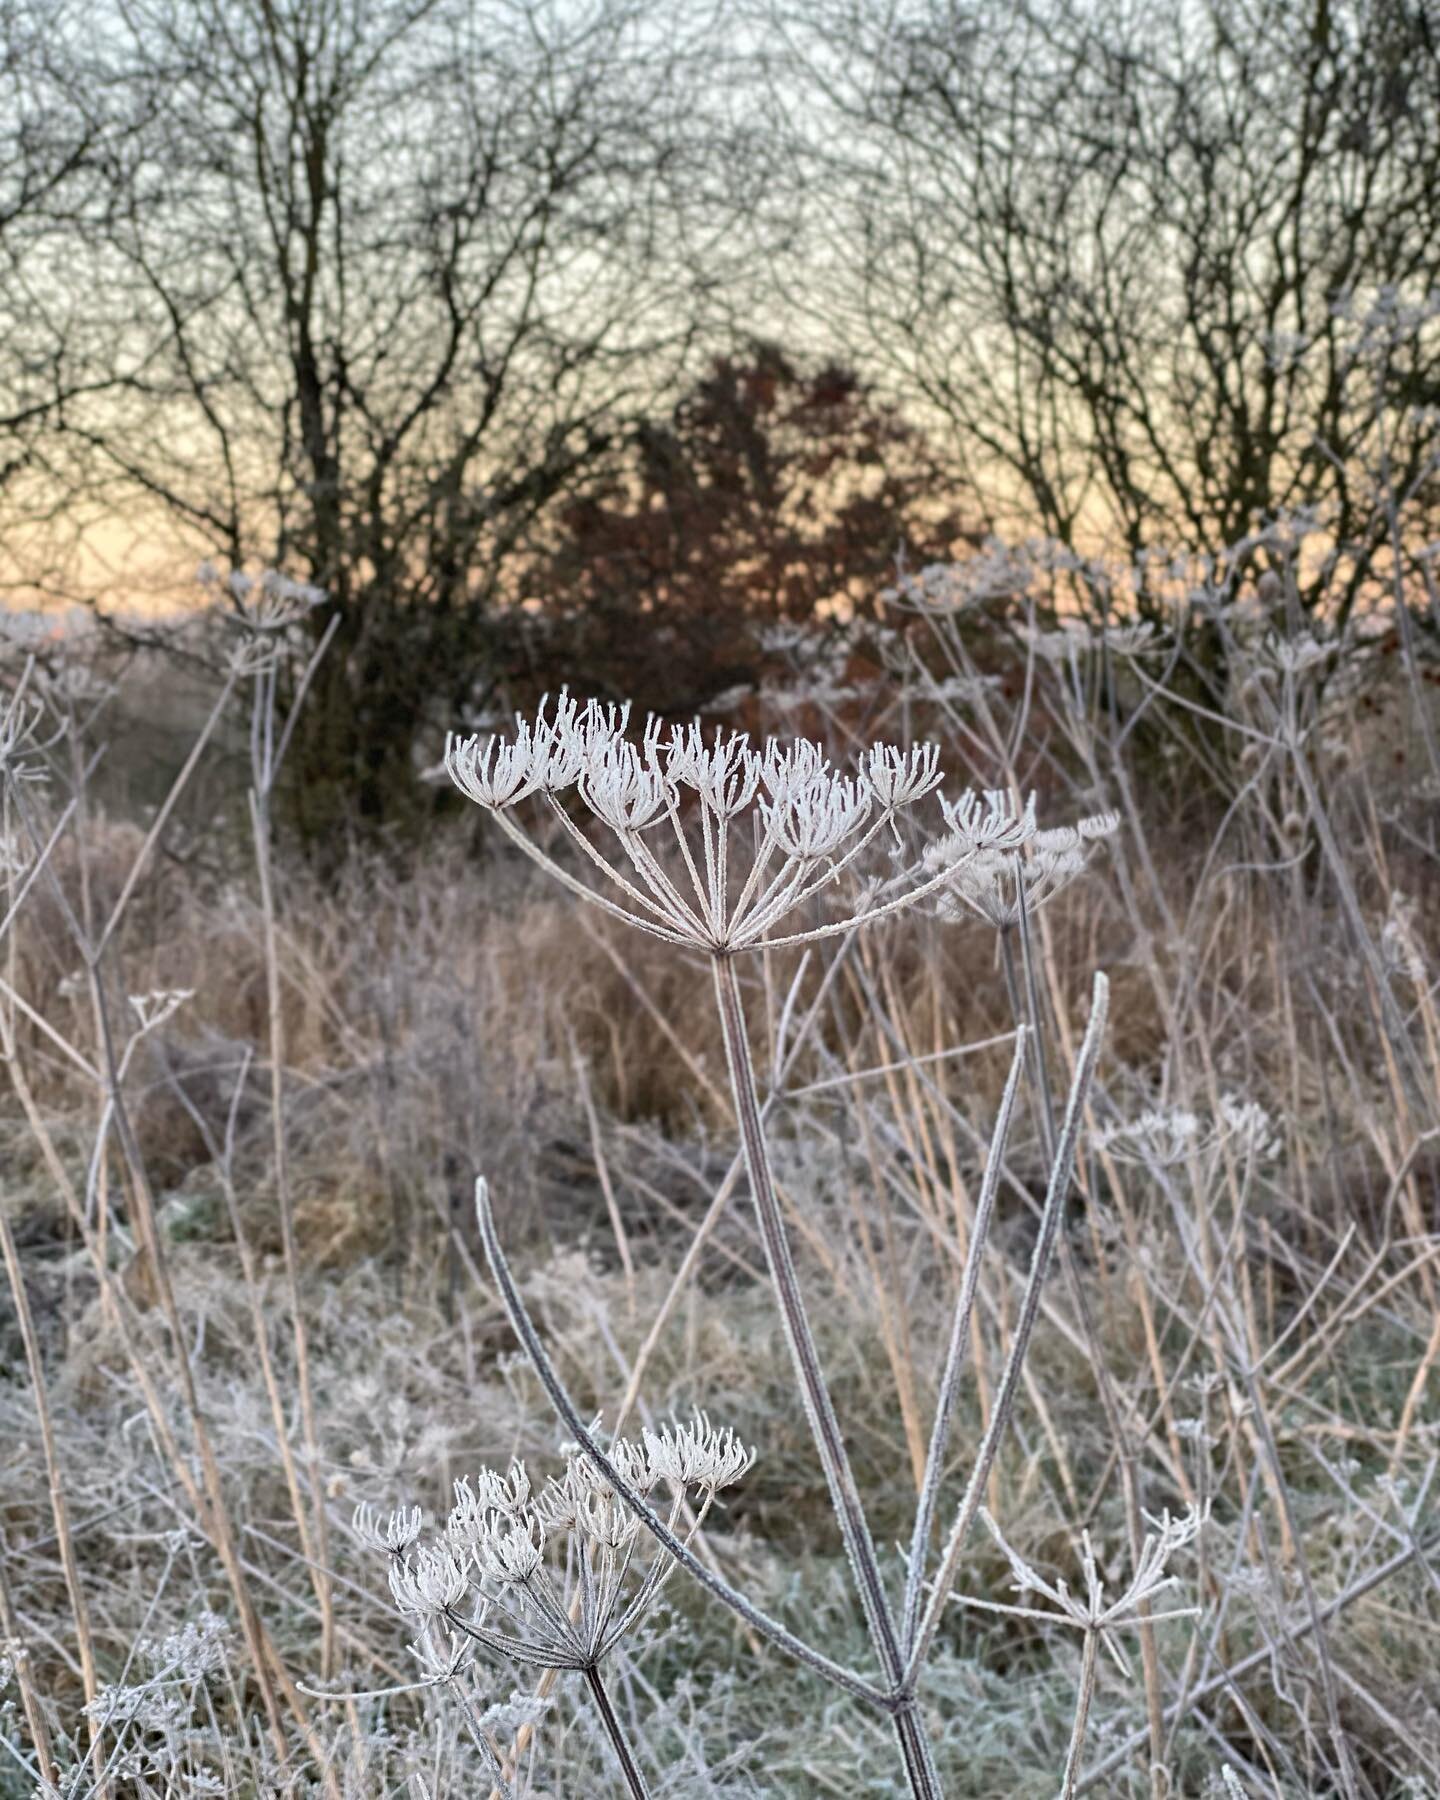 Winter Solstice, the shortest day this year, the first day of astronomical winter.

So much gratitude for your continued support! Warmest wishes for a kind and fruitful year ahead to all !✨

~

#naturelings #wintersolstice #winternature #uknature #na